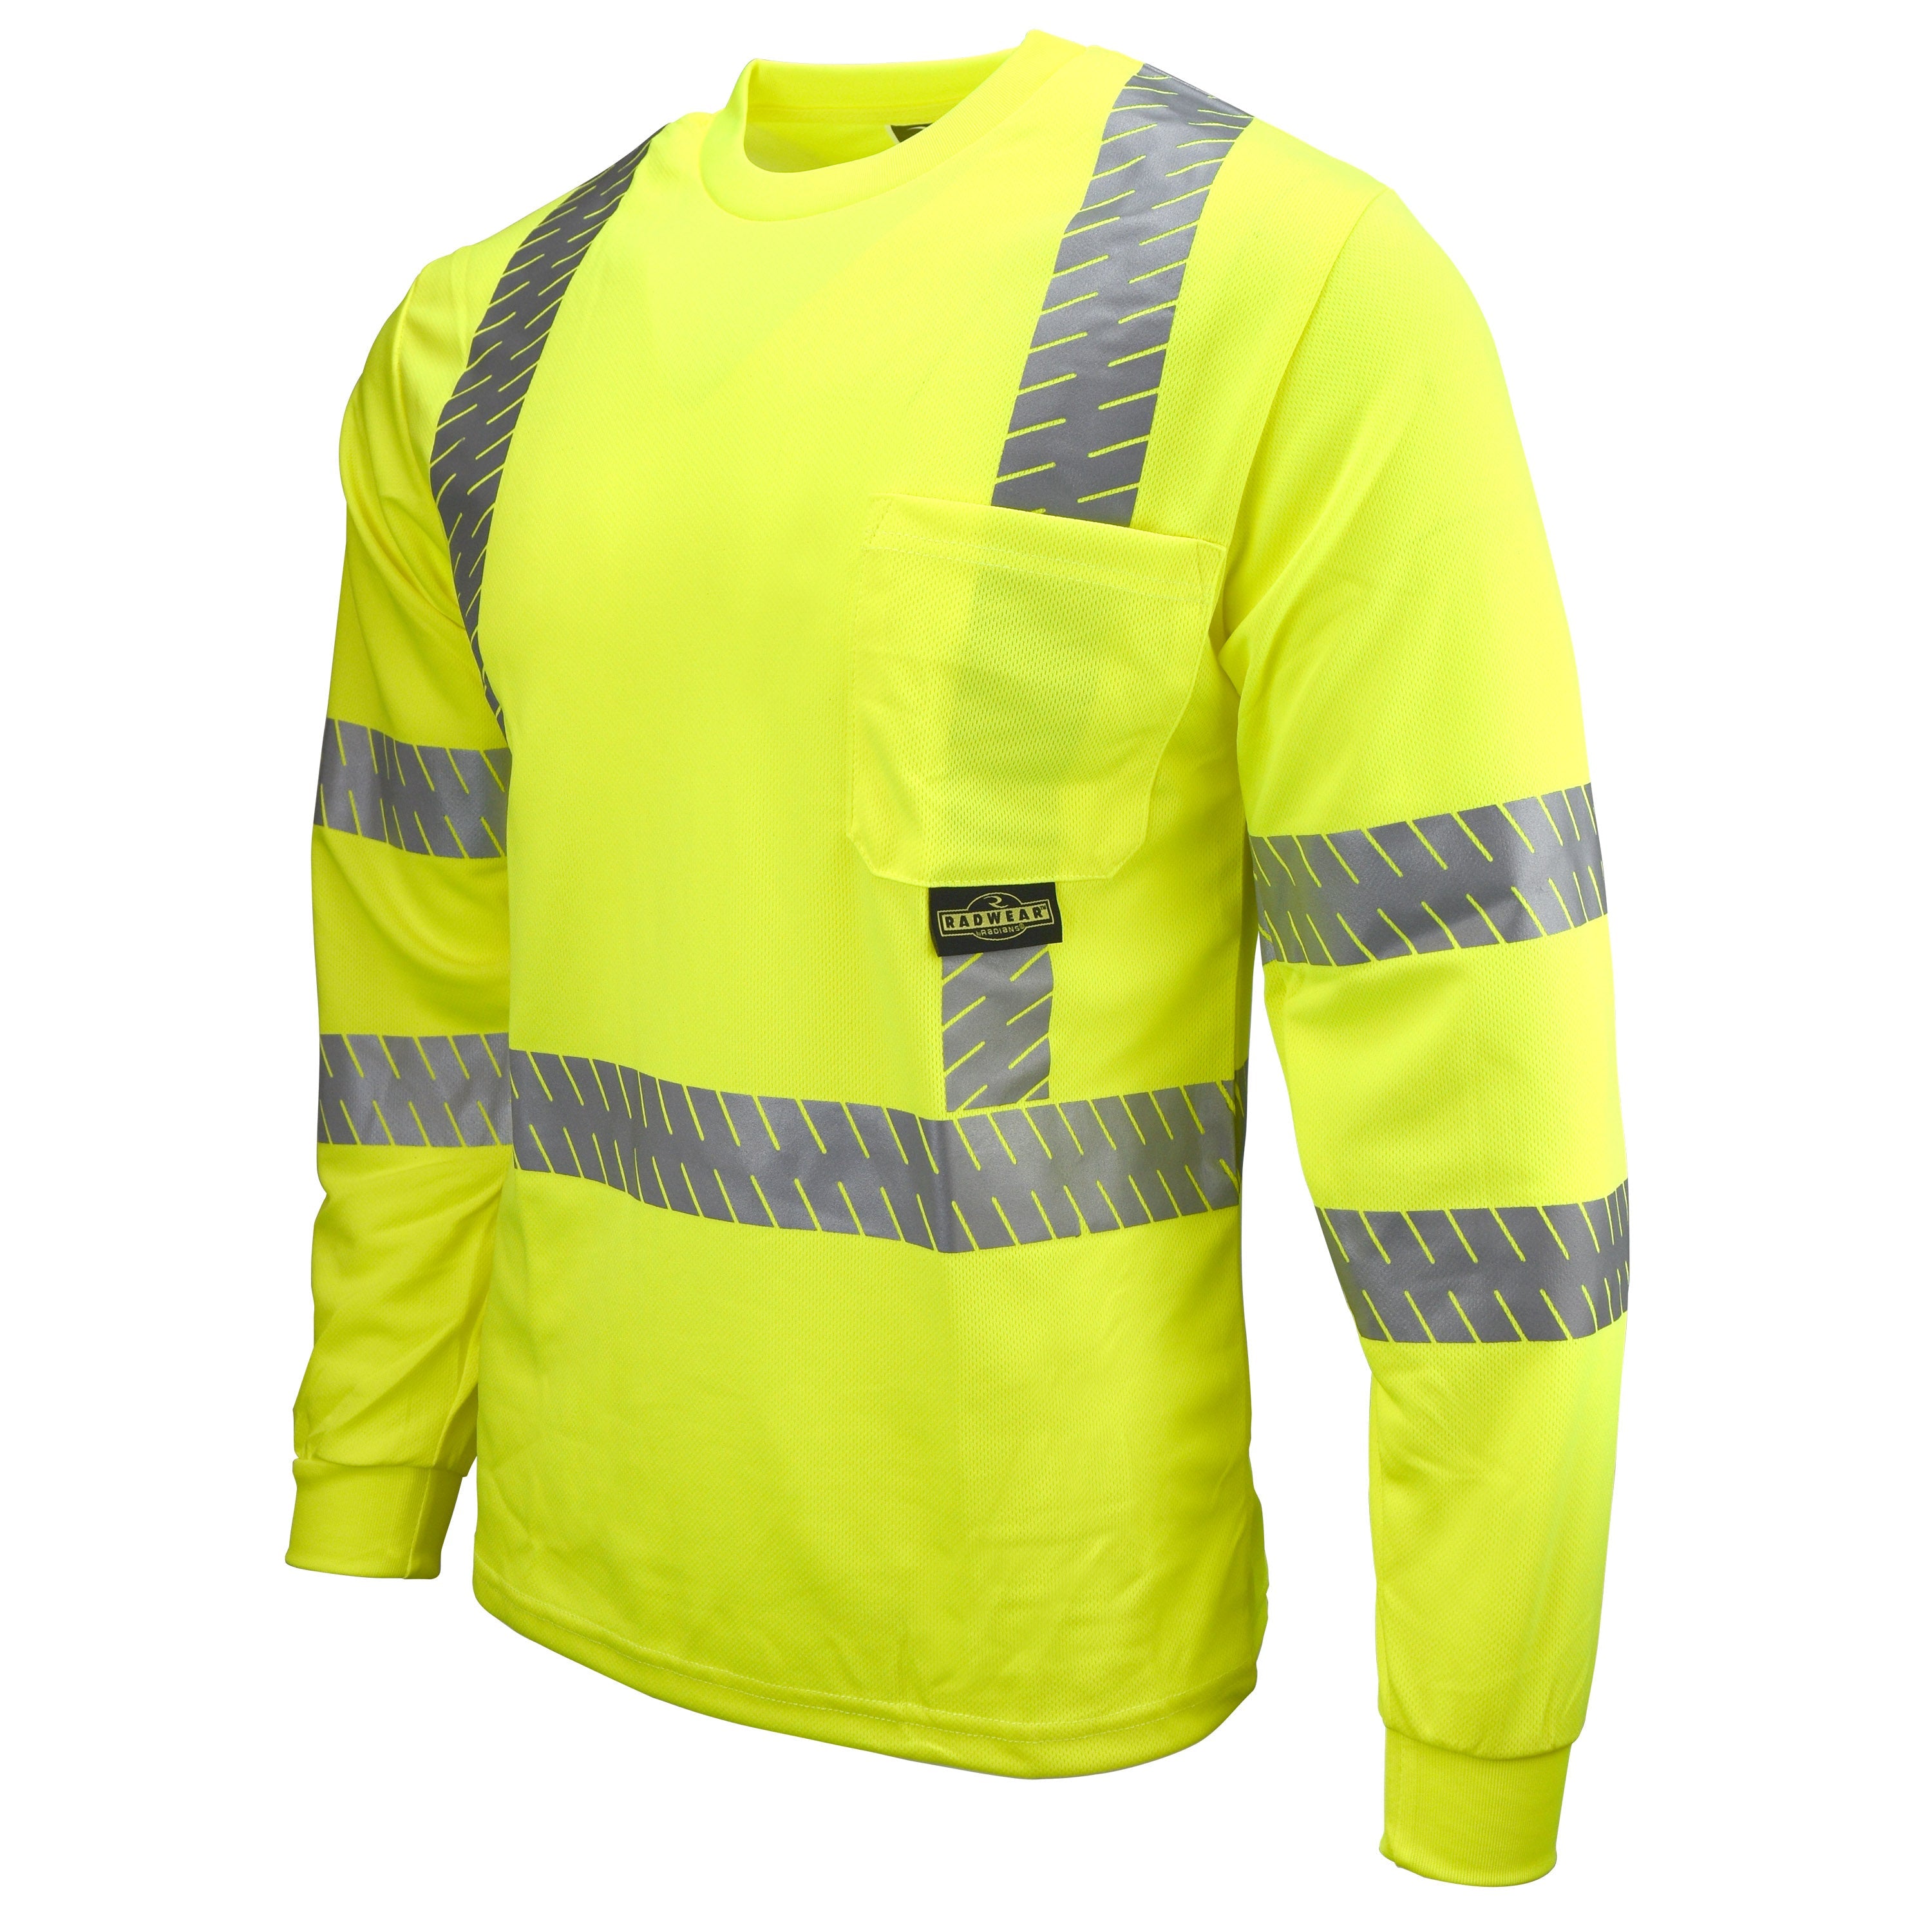 Radians ST24-3 Class 3 High Visibility Long Sleeve Safety T-Shirt with Rad-Shade® UV Protection